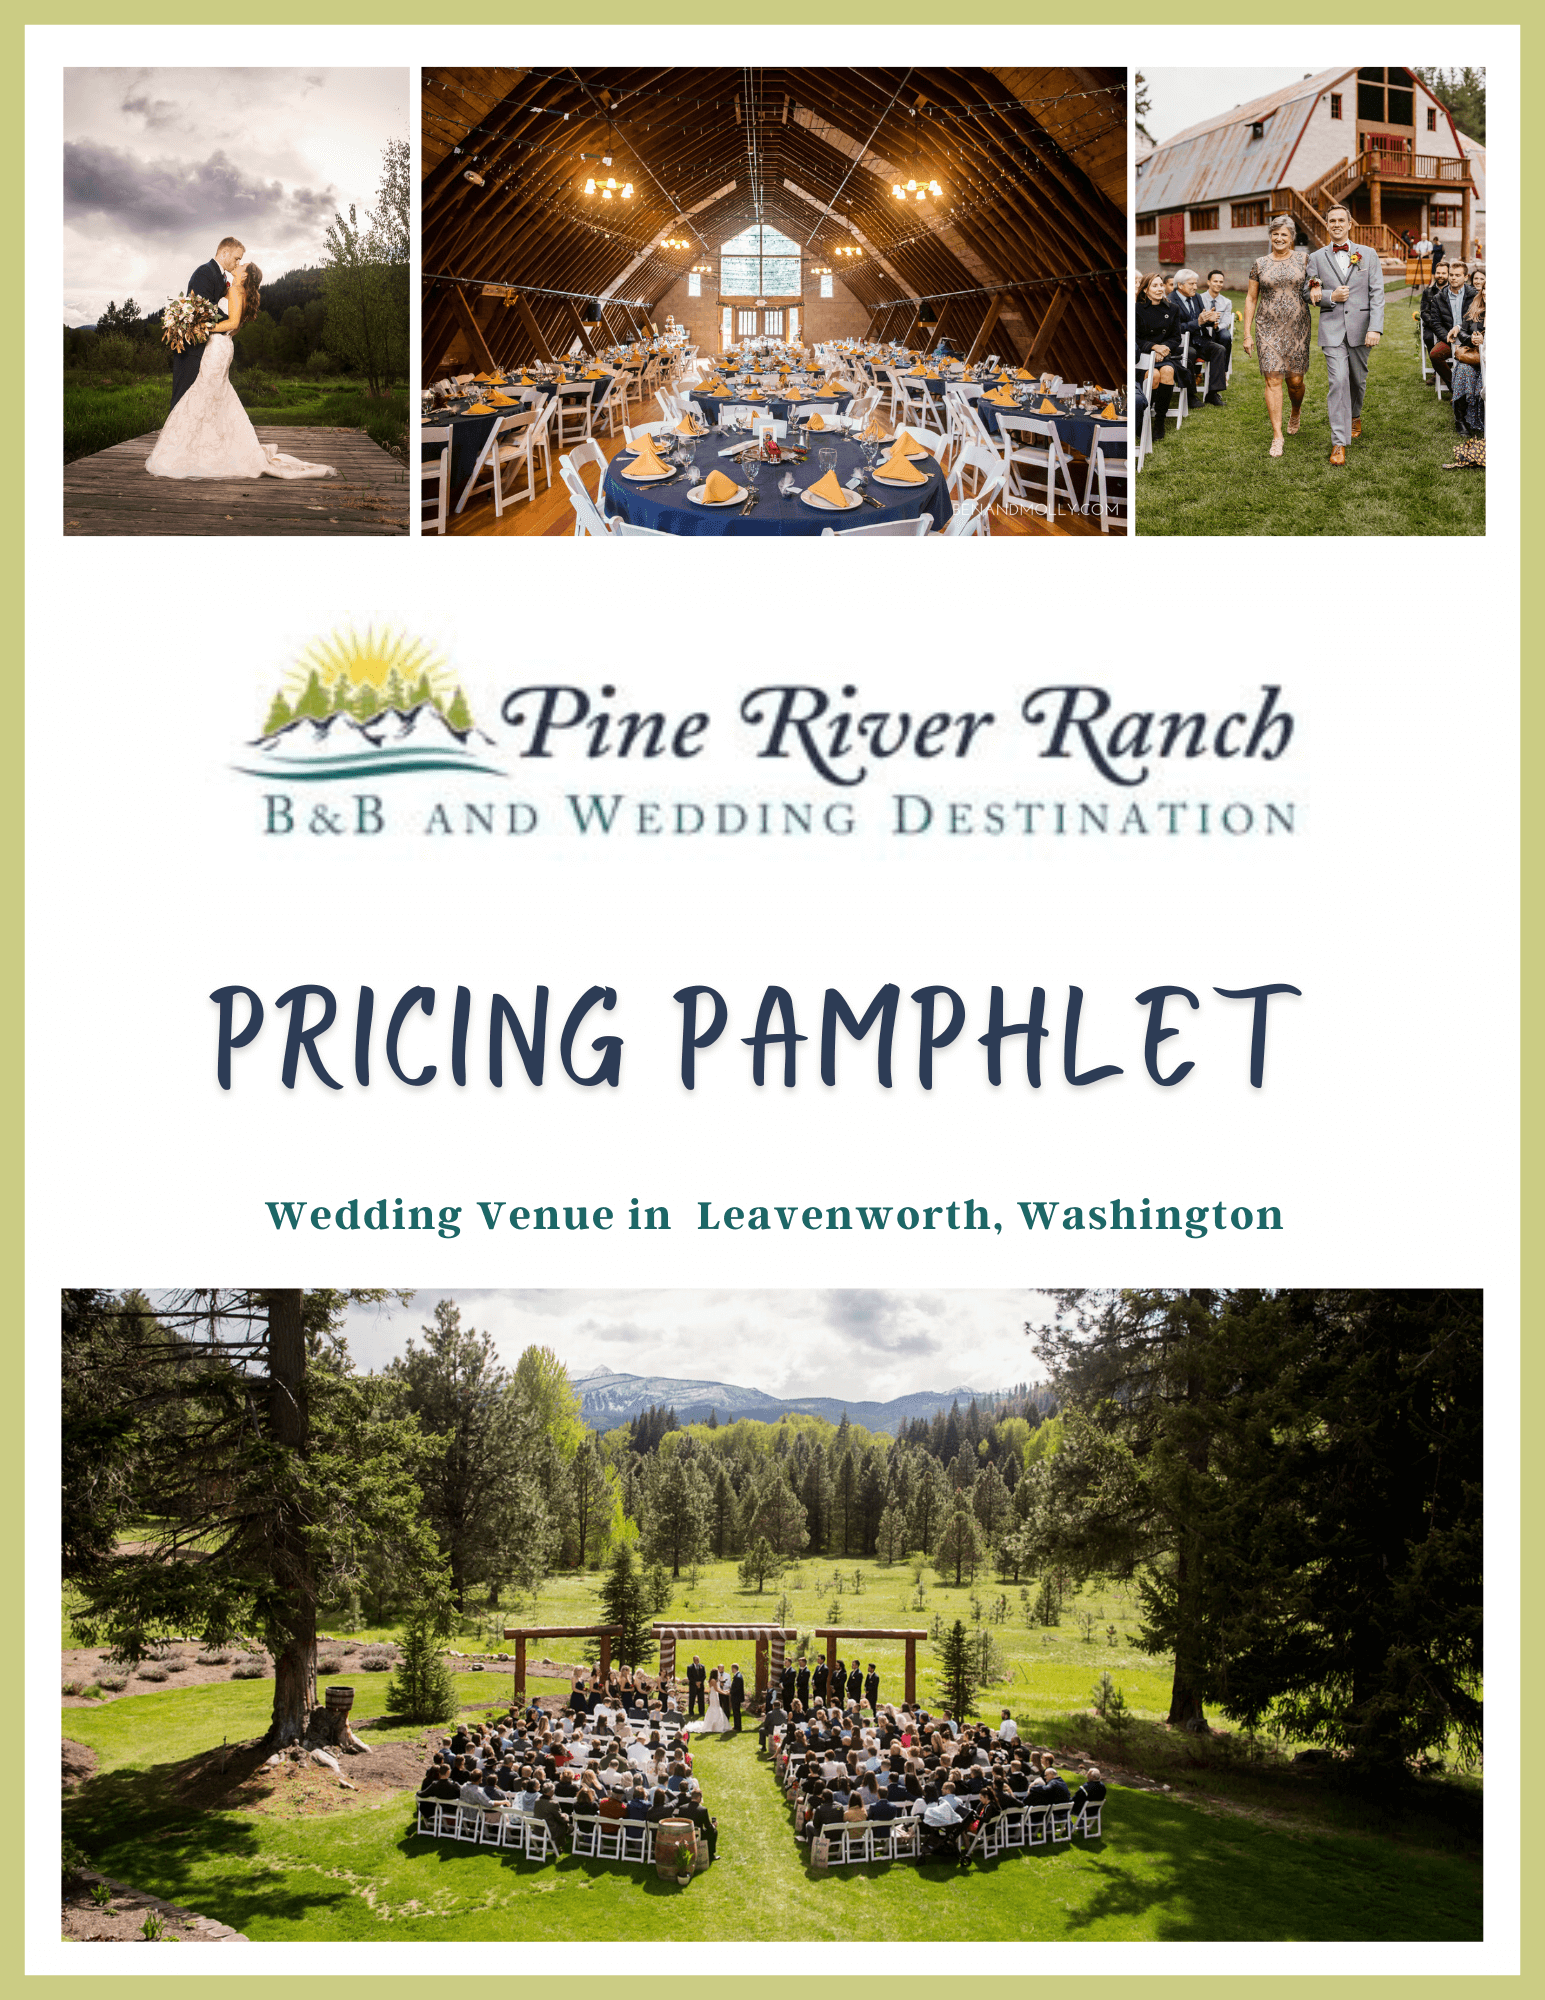 Pine River Ranch Pricing Pamphlet